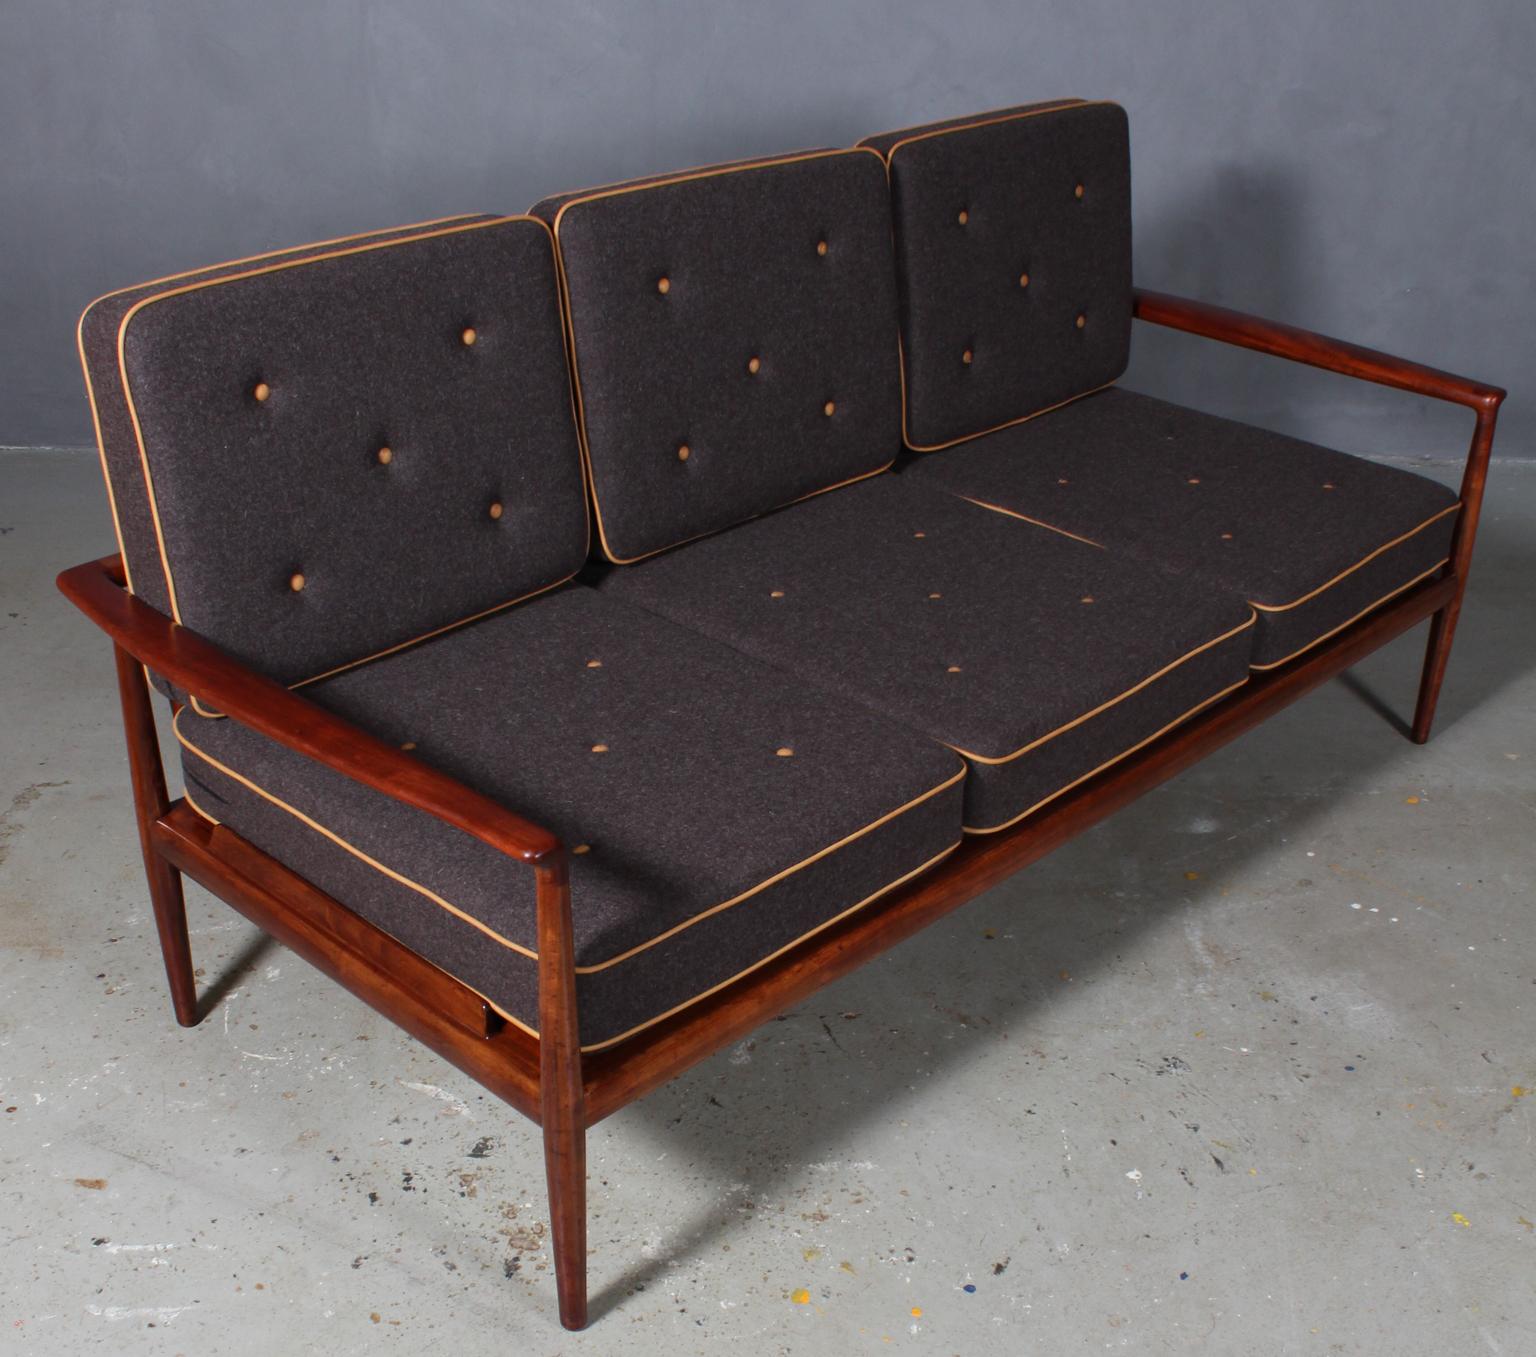 Jacob Kjær three-seat sofa with deep seats. New upholstered with 100 % New Zealand wool and vintage aniline tubing and buttons.

Frame of mahogany.

Made by Jacob Kjær in the 1940s, probably unique.